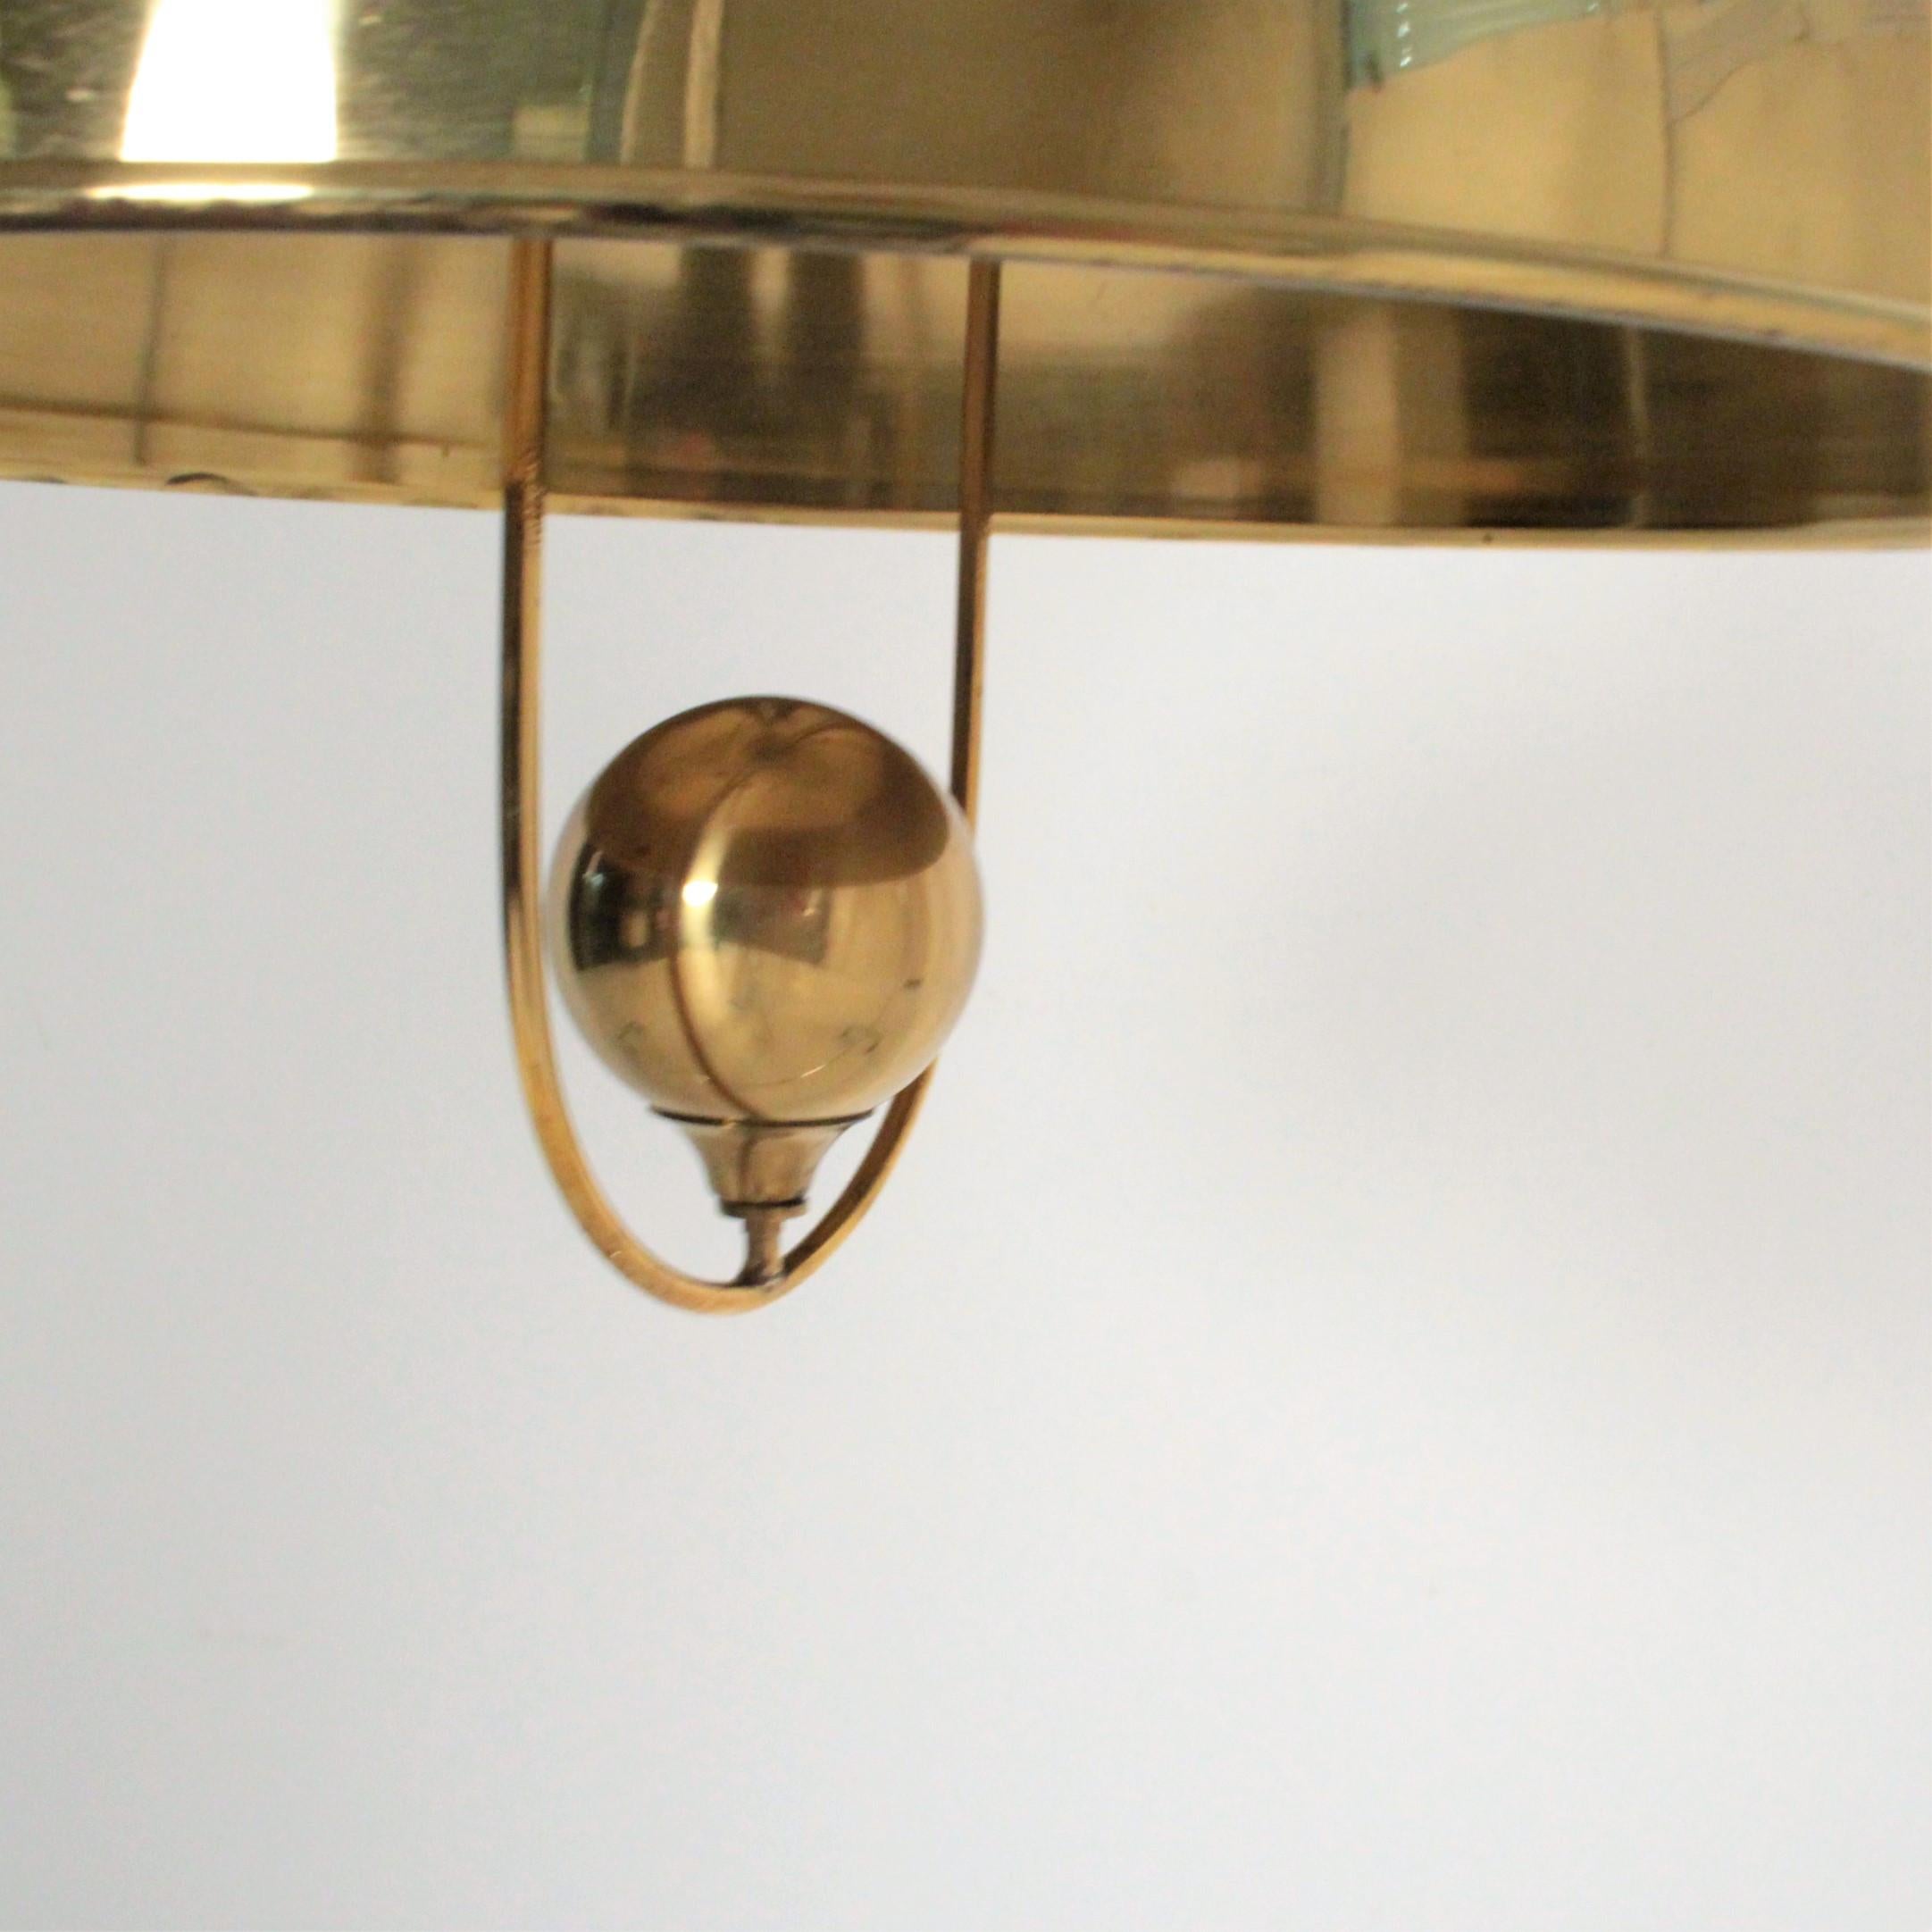 Mid-Century Modern Florian Schulz Pendant Brass with Weight Light, Germany, 1970 For Sale